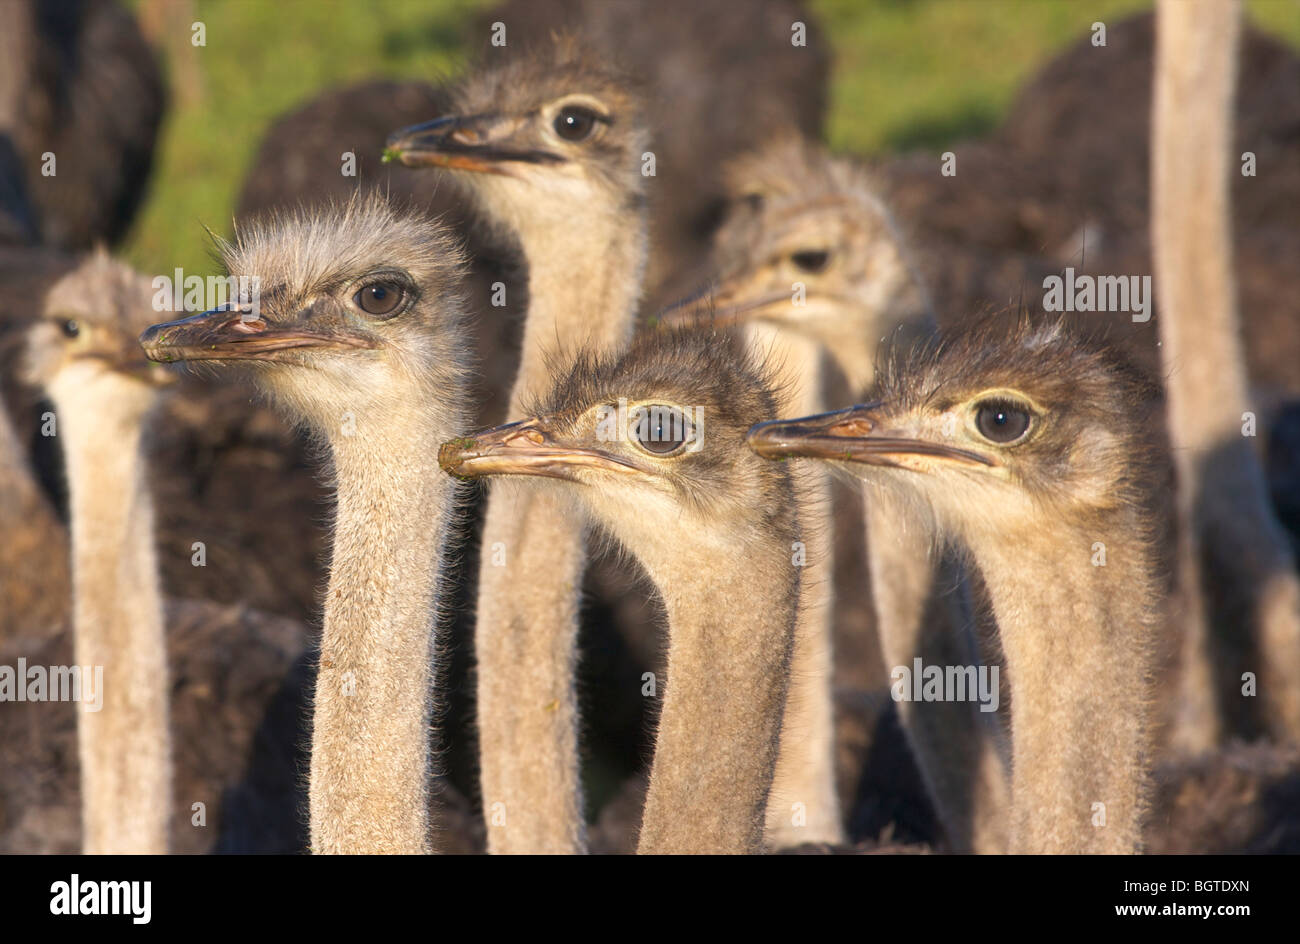 Close -Up of inquisitive Common Ostriches (Struthio camelus), Overberg Region, Western Cape , South Africa Stock Photo